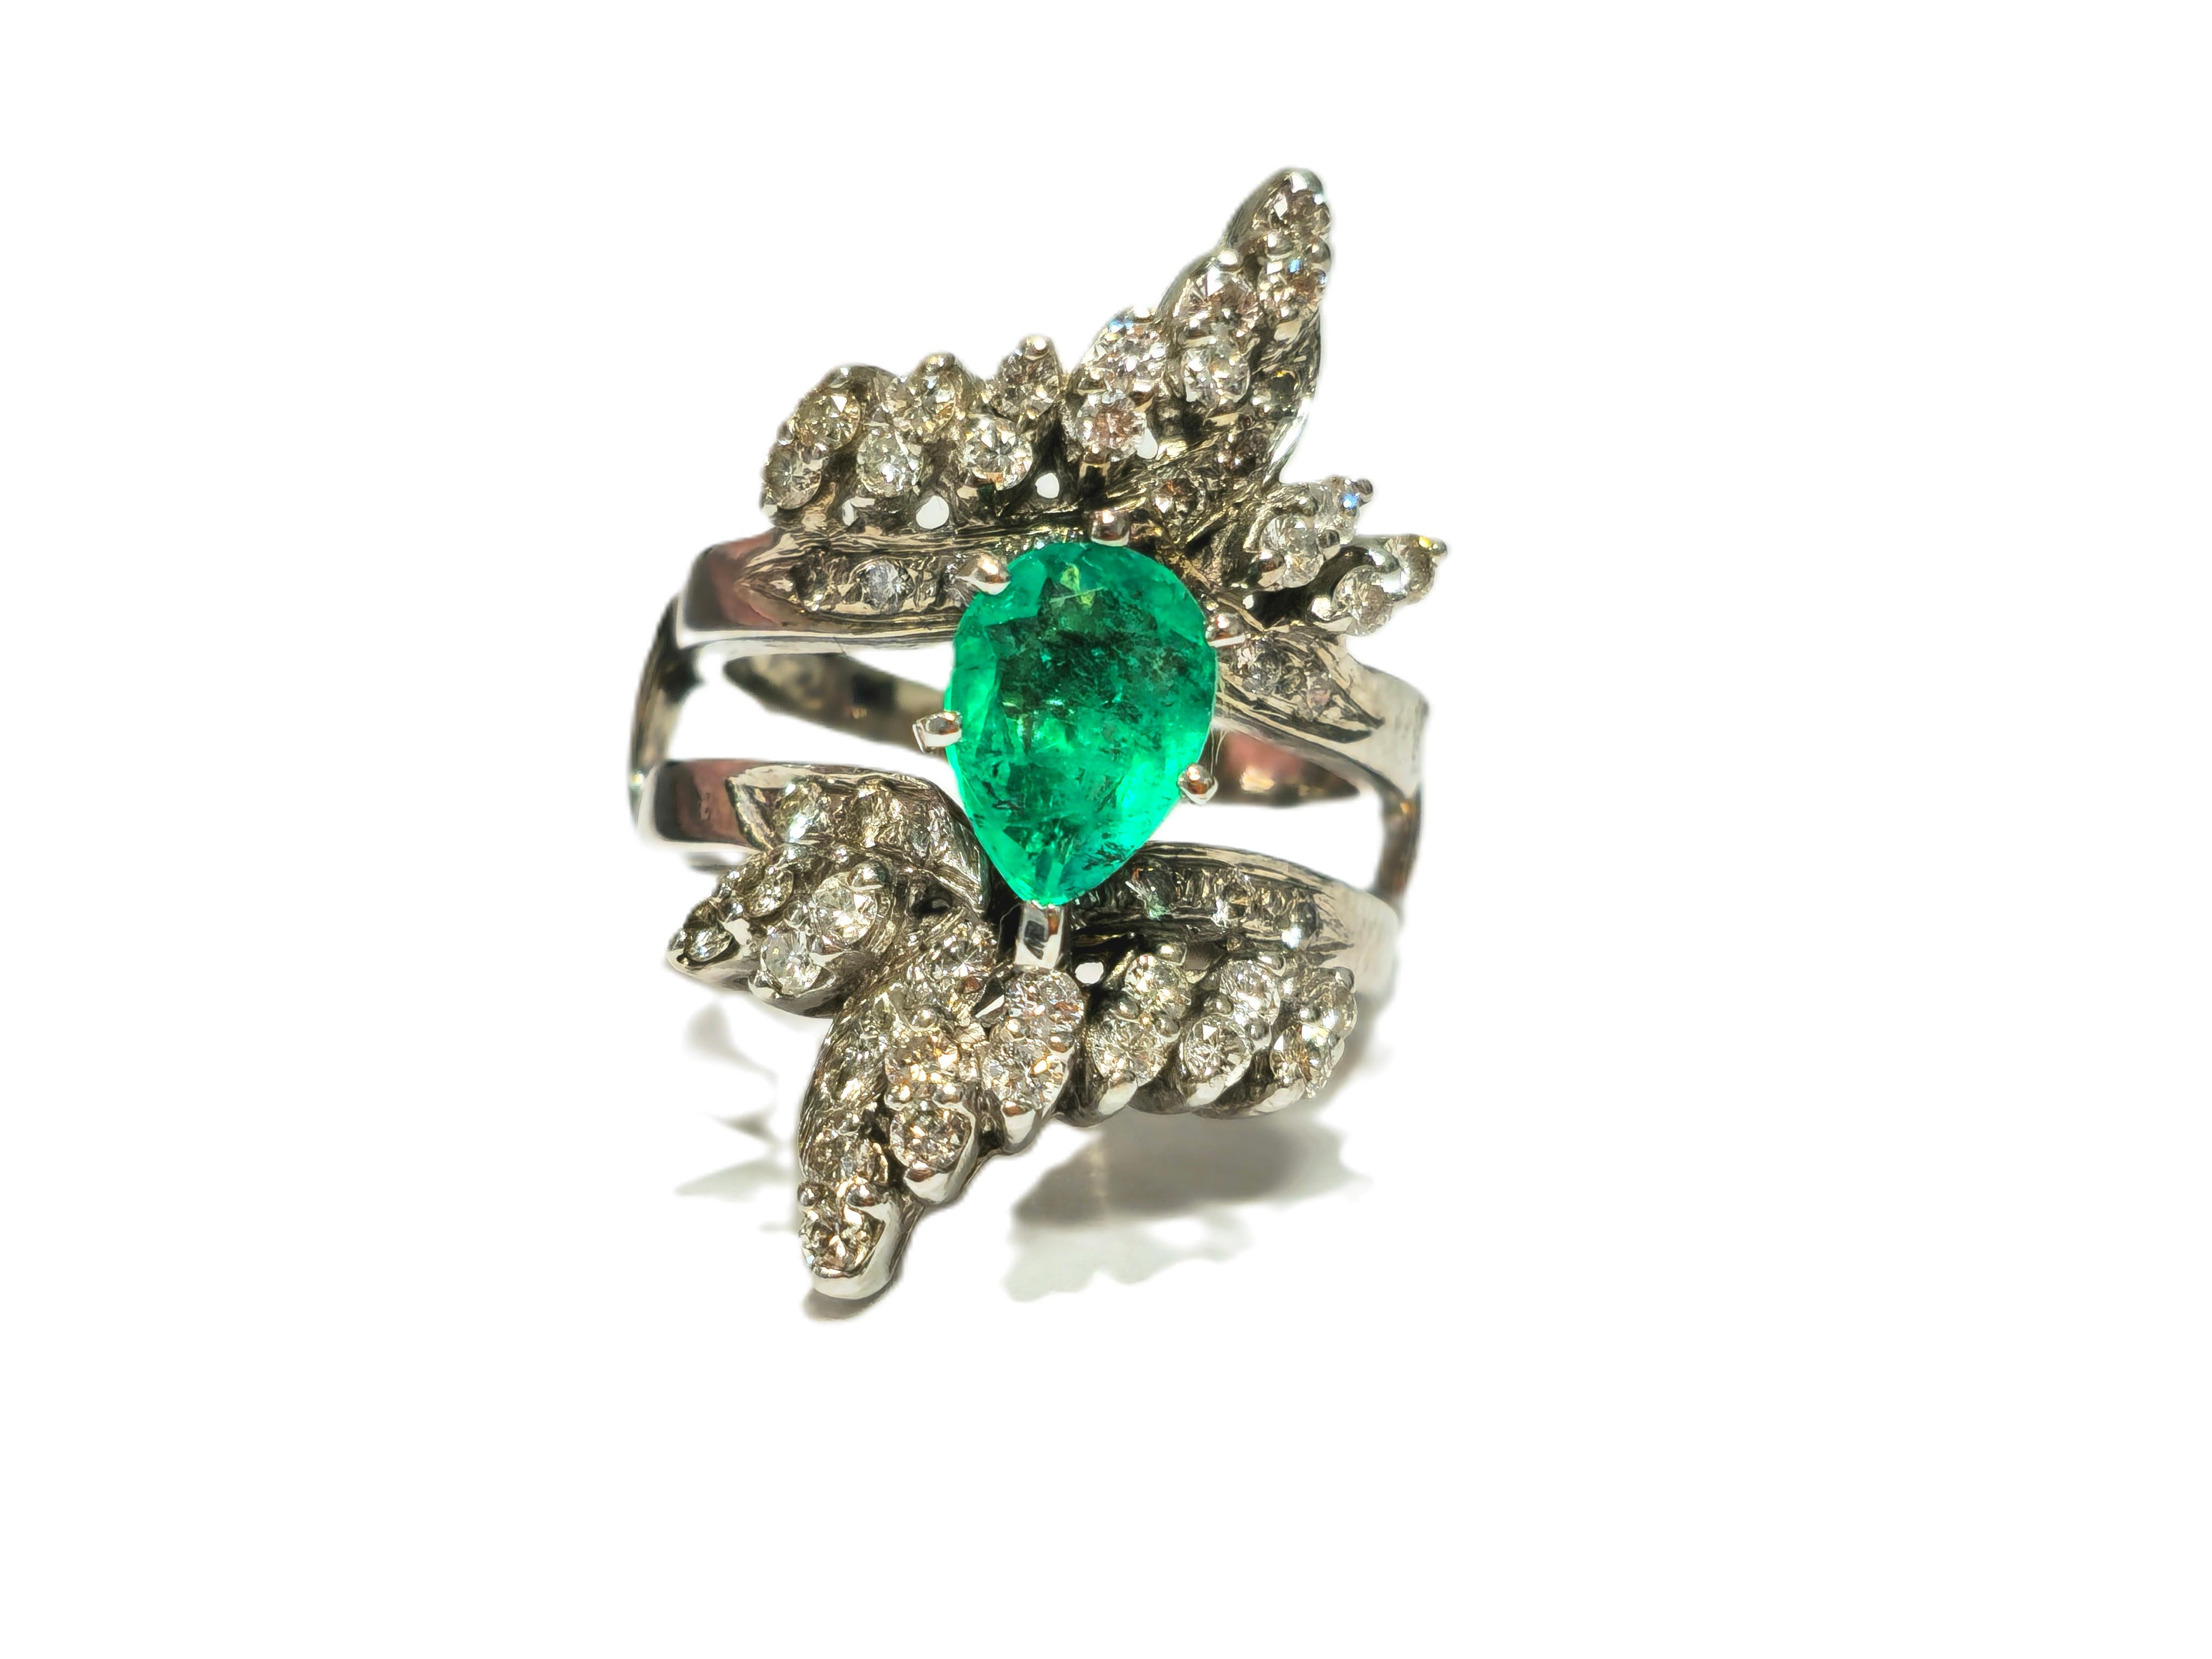 5.50 Carat Colombian Emerald Diamond Cocktail Ring For Sale